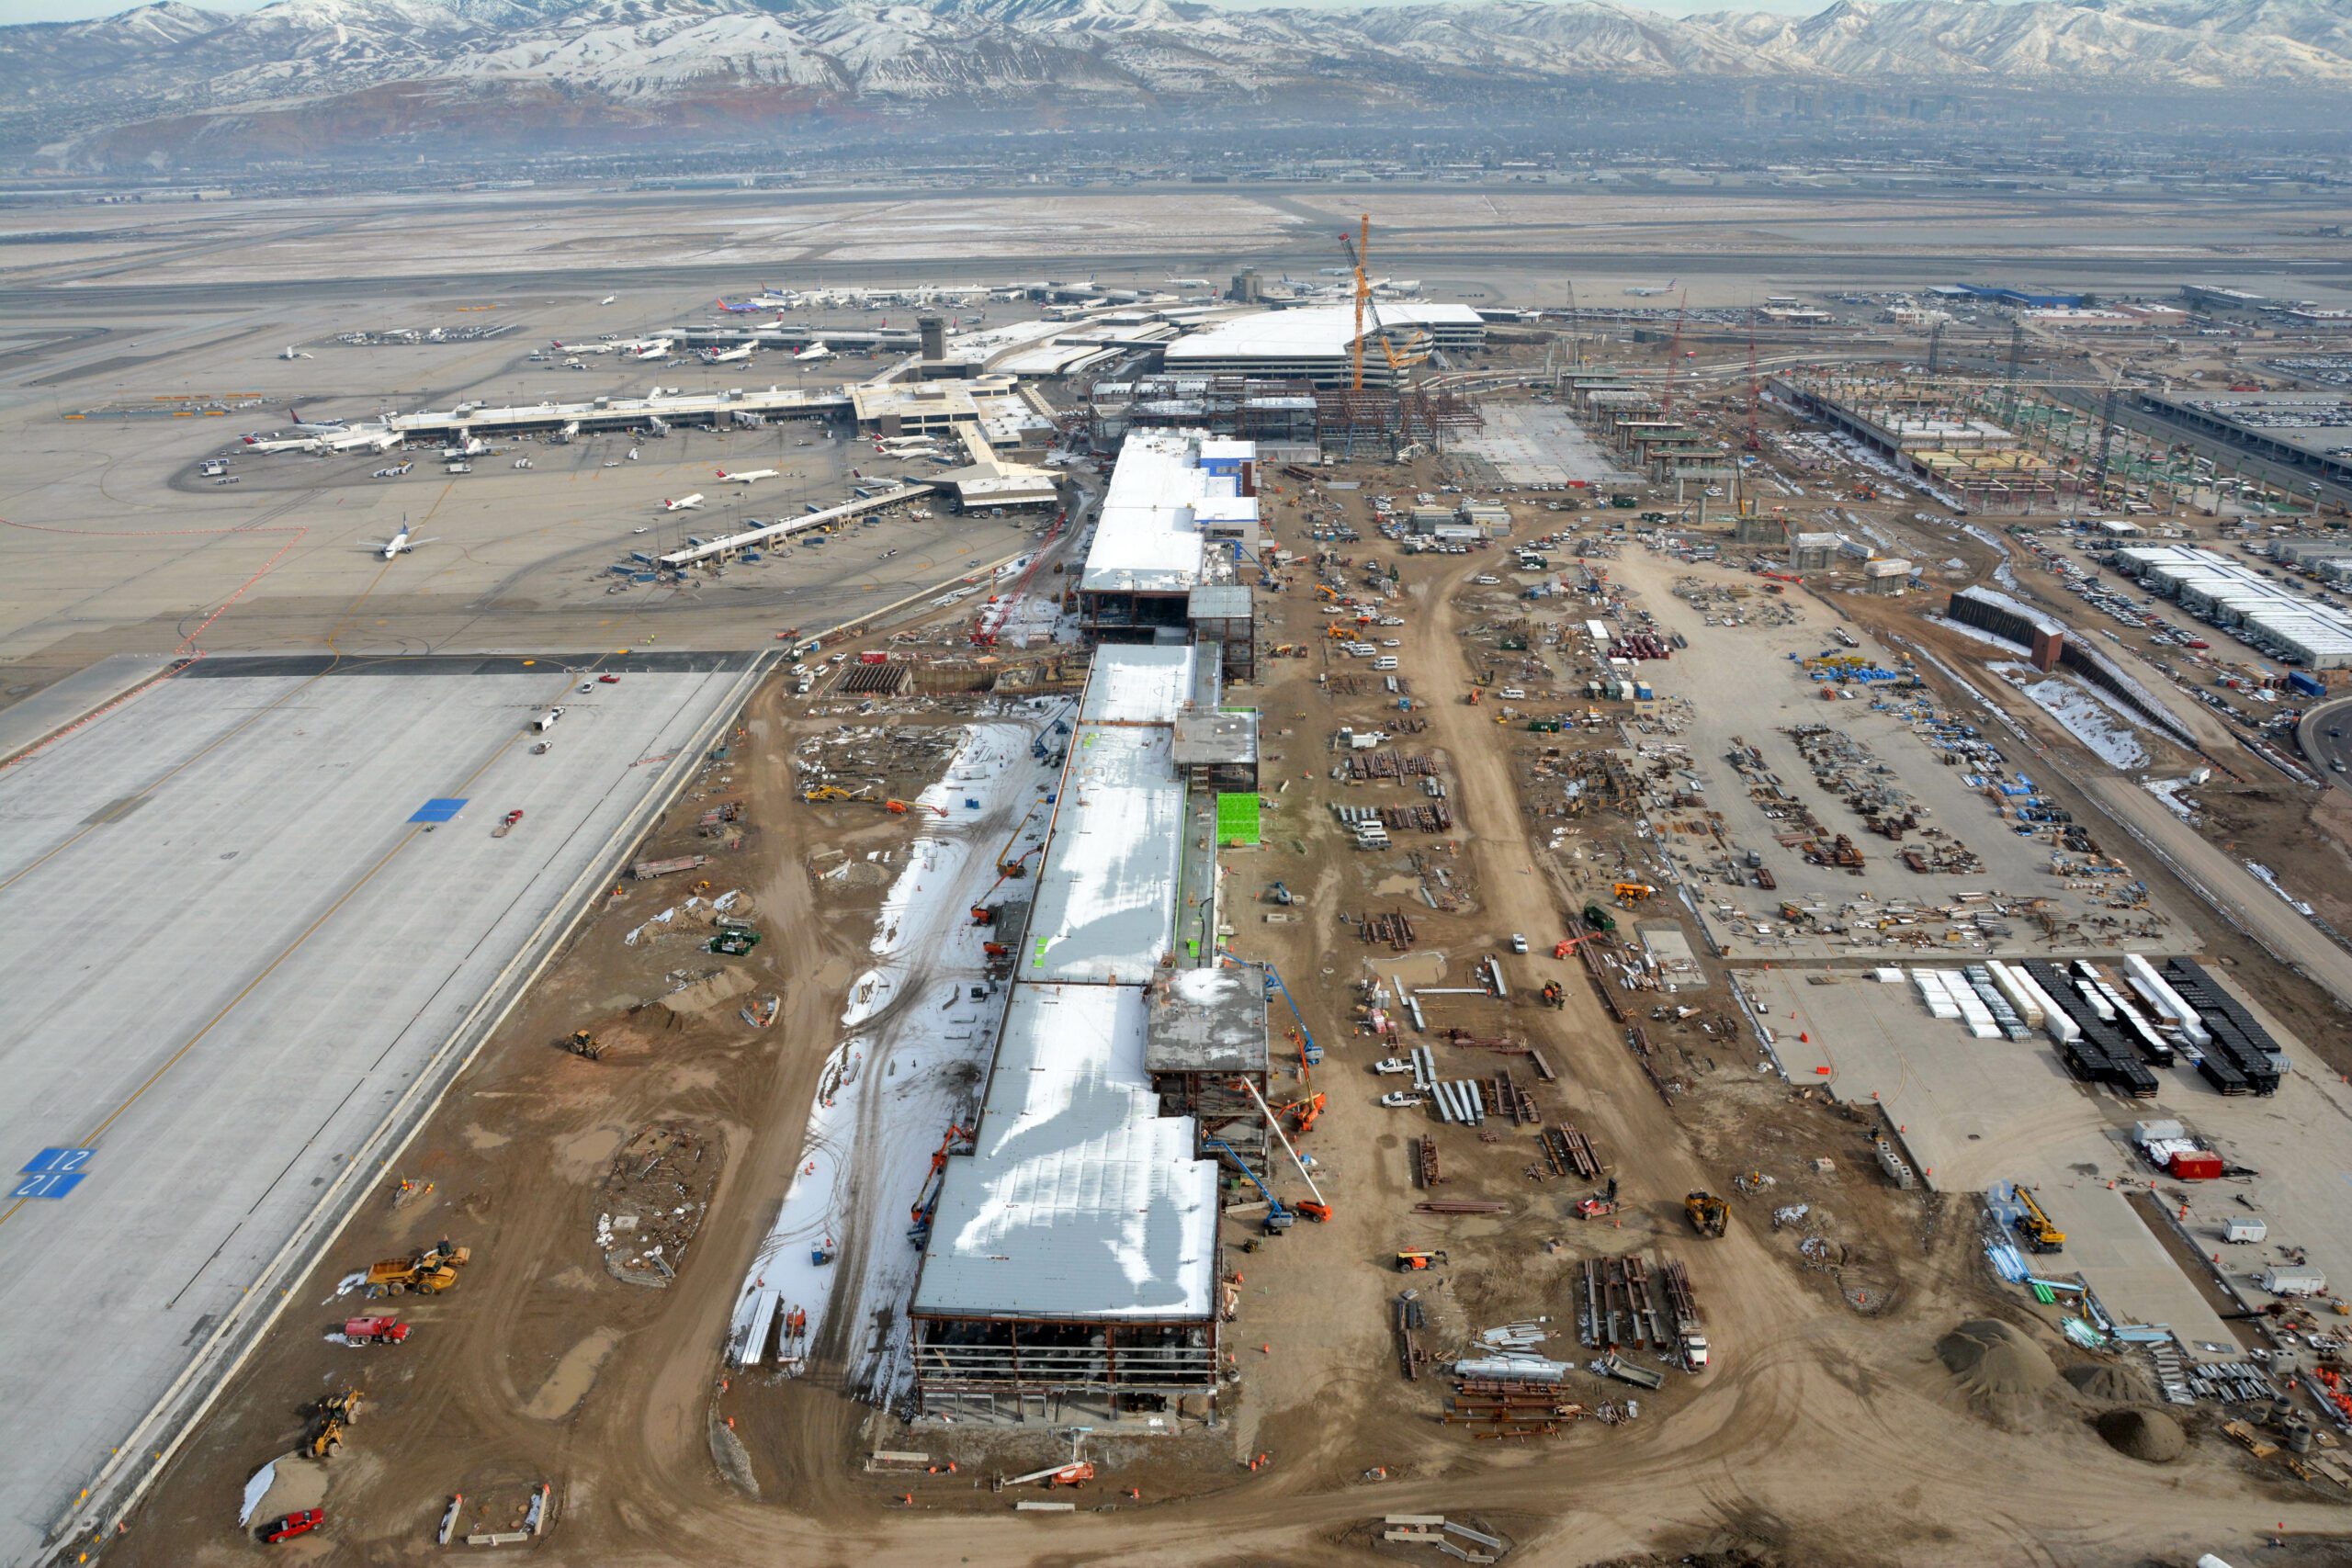 Aerial view of Salt Lake City International Airport expansion site with active construction, featuring equipment and partially constructed buildings, set against a backdrop of snowy mountains.